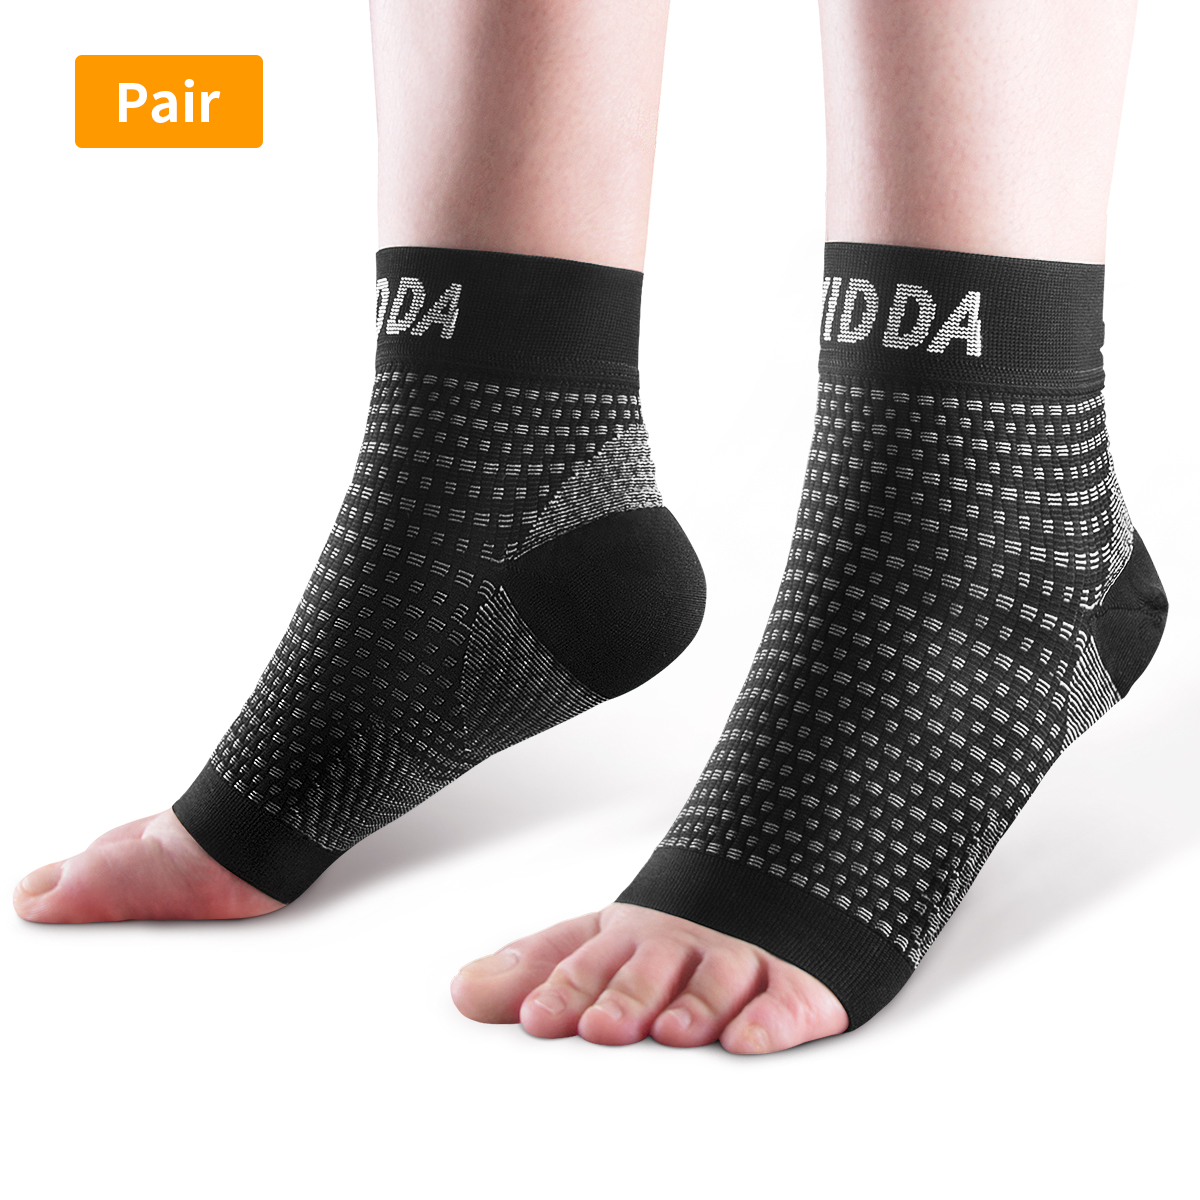 Ankle Brace for Men Women Pair - AVIDDA Plantar Fasciitis Socks with Arch Support Compression Ankle Support Foot Sleeve for Achilles Tendon Support, Swelling Eases, Heel Pain Relief